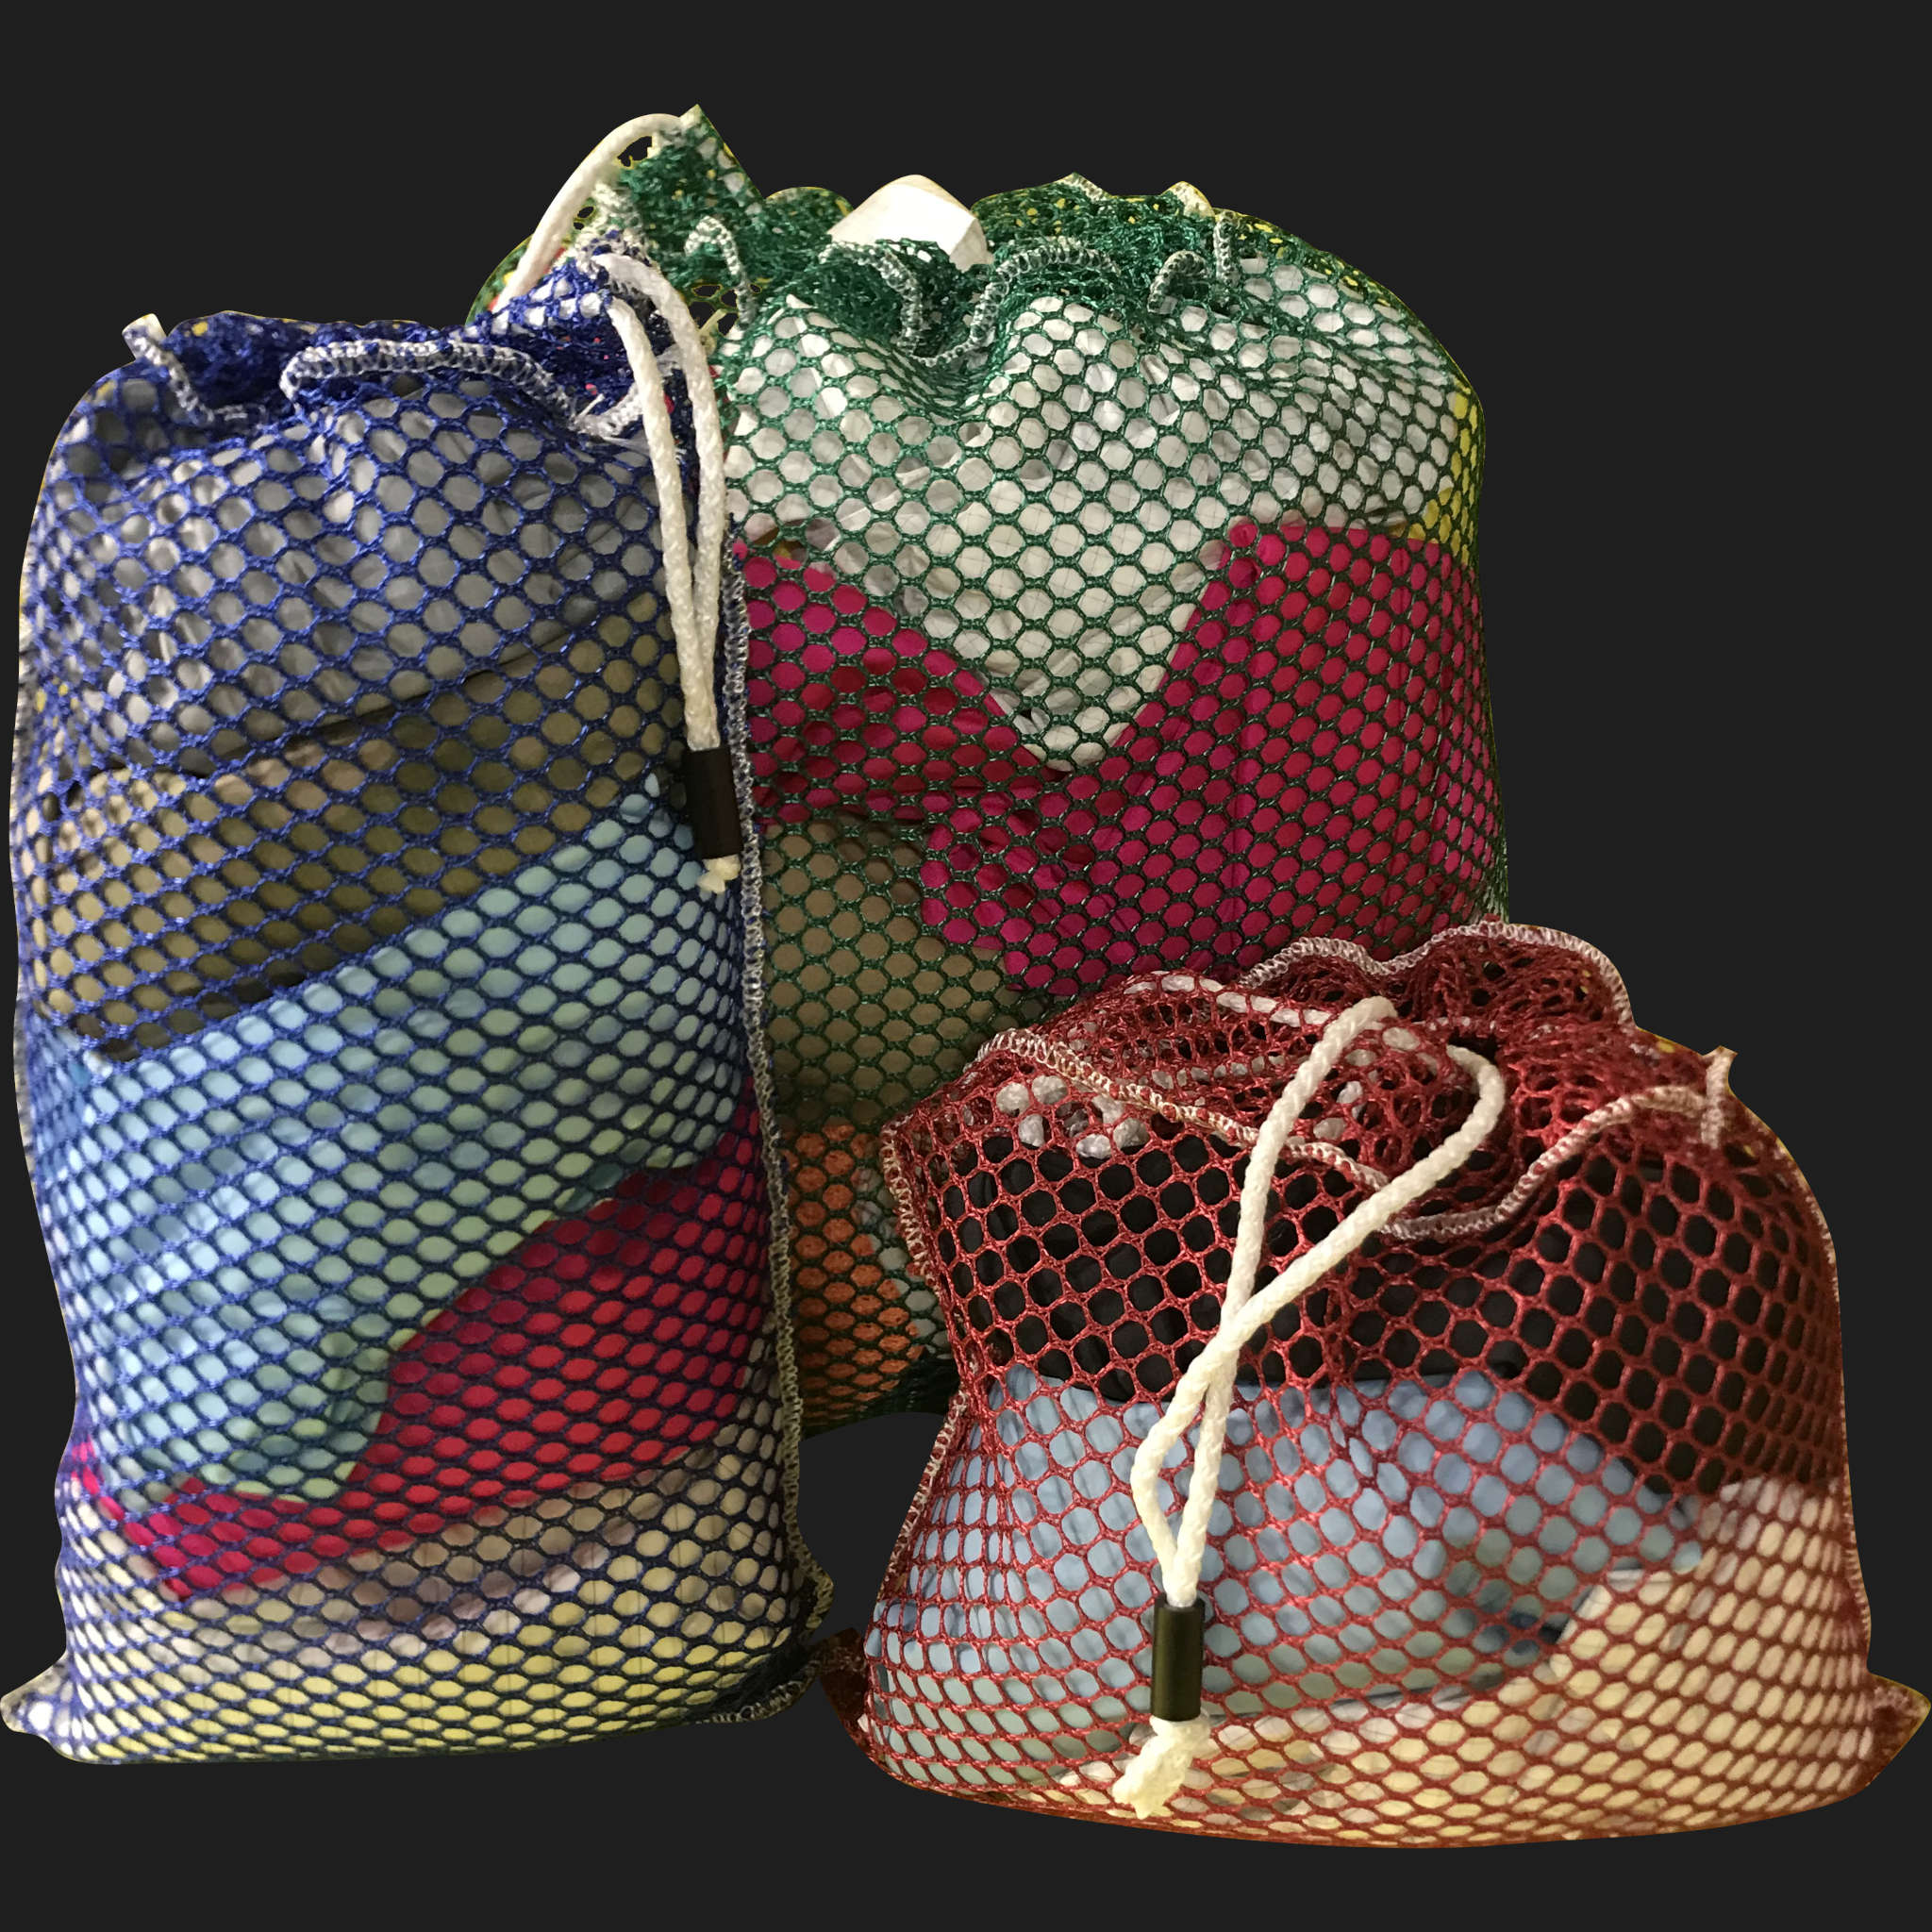 20" x 24" Customized Mesh-Net-Laundry Bags Heavy Duty with Cord and barrellock closure